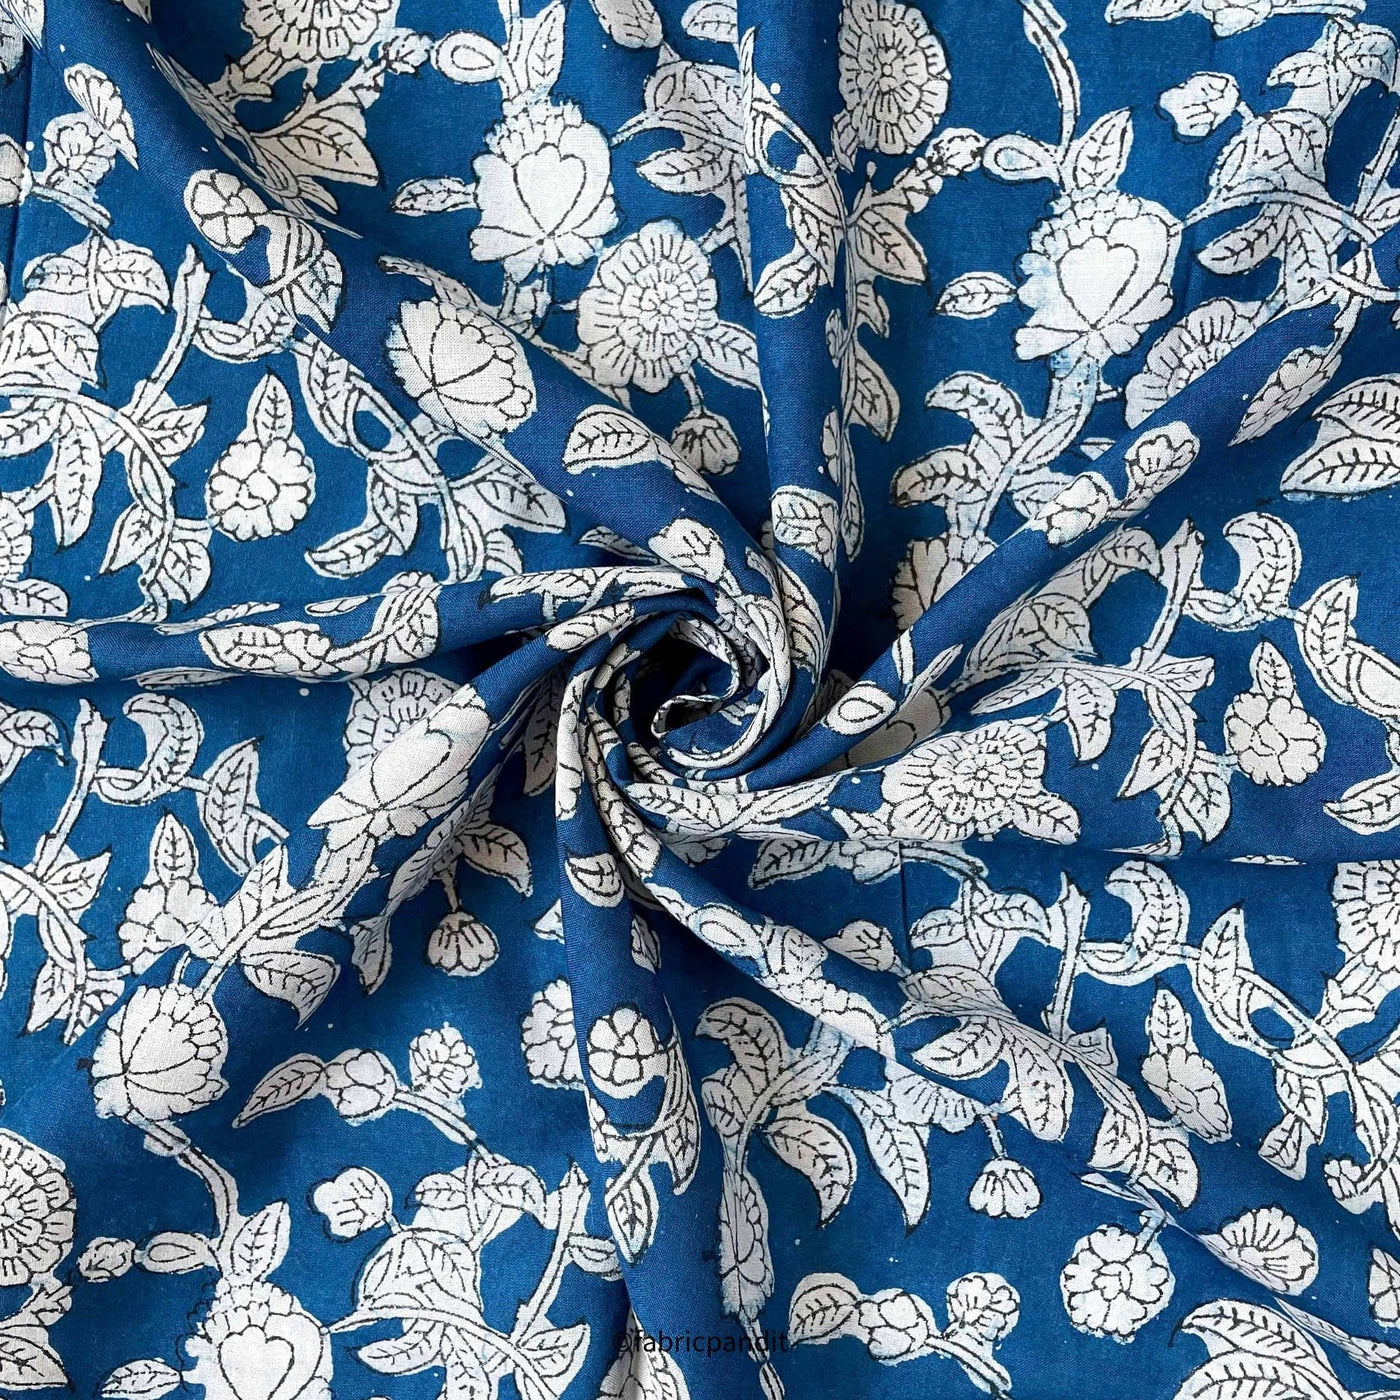 Hand Block Printed Cotton Fabric Cut Piece (CUT PIECE) Bright Blue & White Floral Jaal Hand Block Printed Pure Cotton Modal Fabric (Width 42 inches)